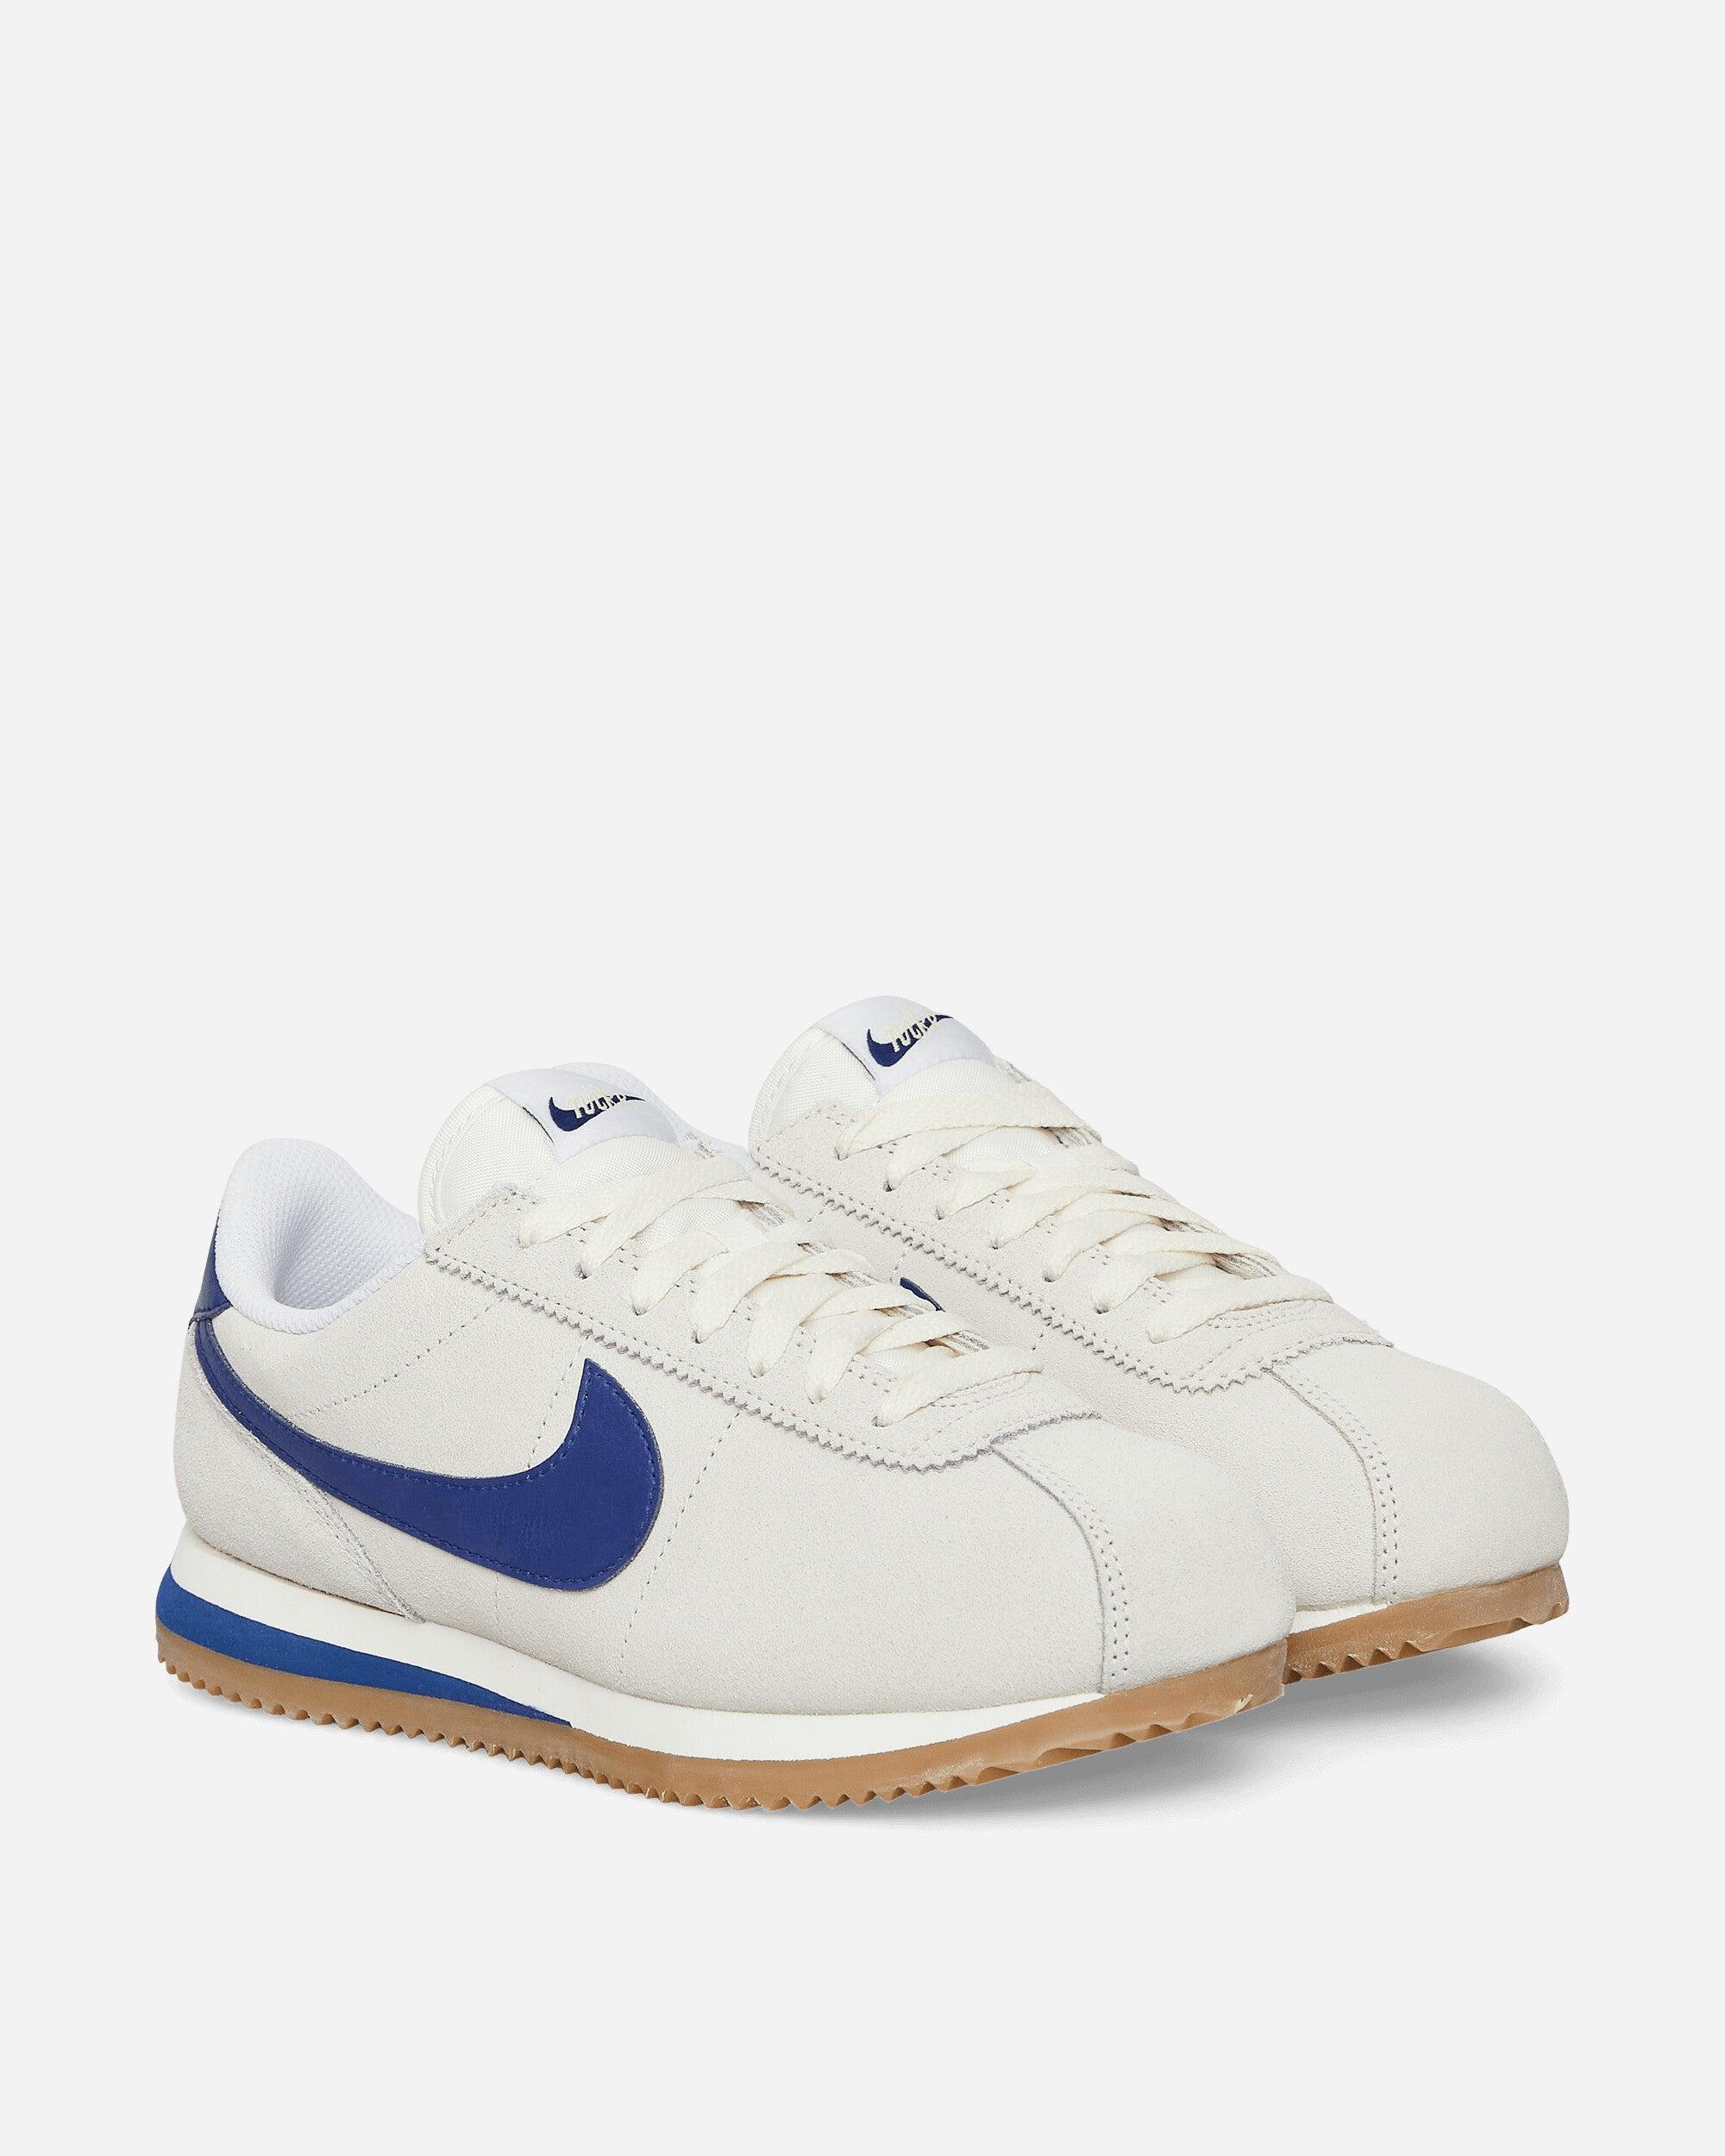 Nike Cortez Brand-embellished Leather Low-top Trainers in Blue for Men |  Lyst